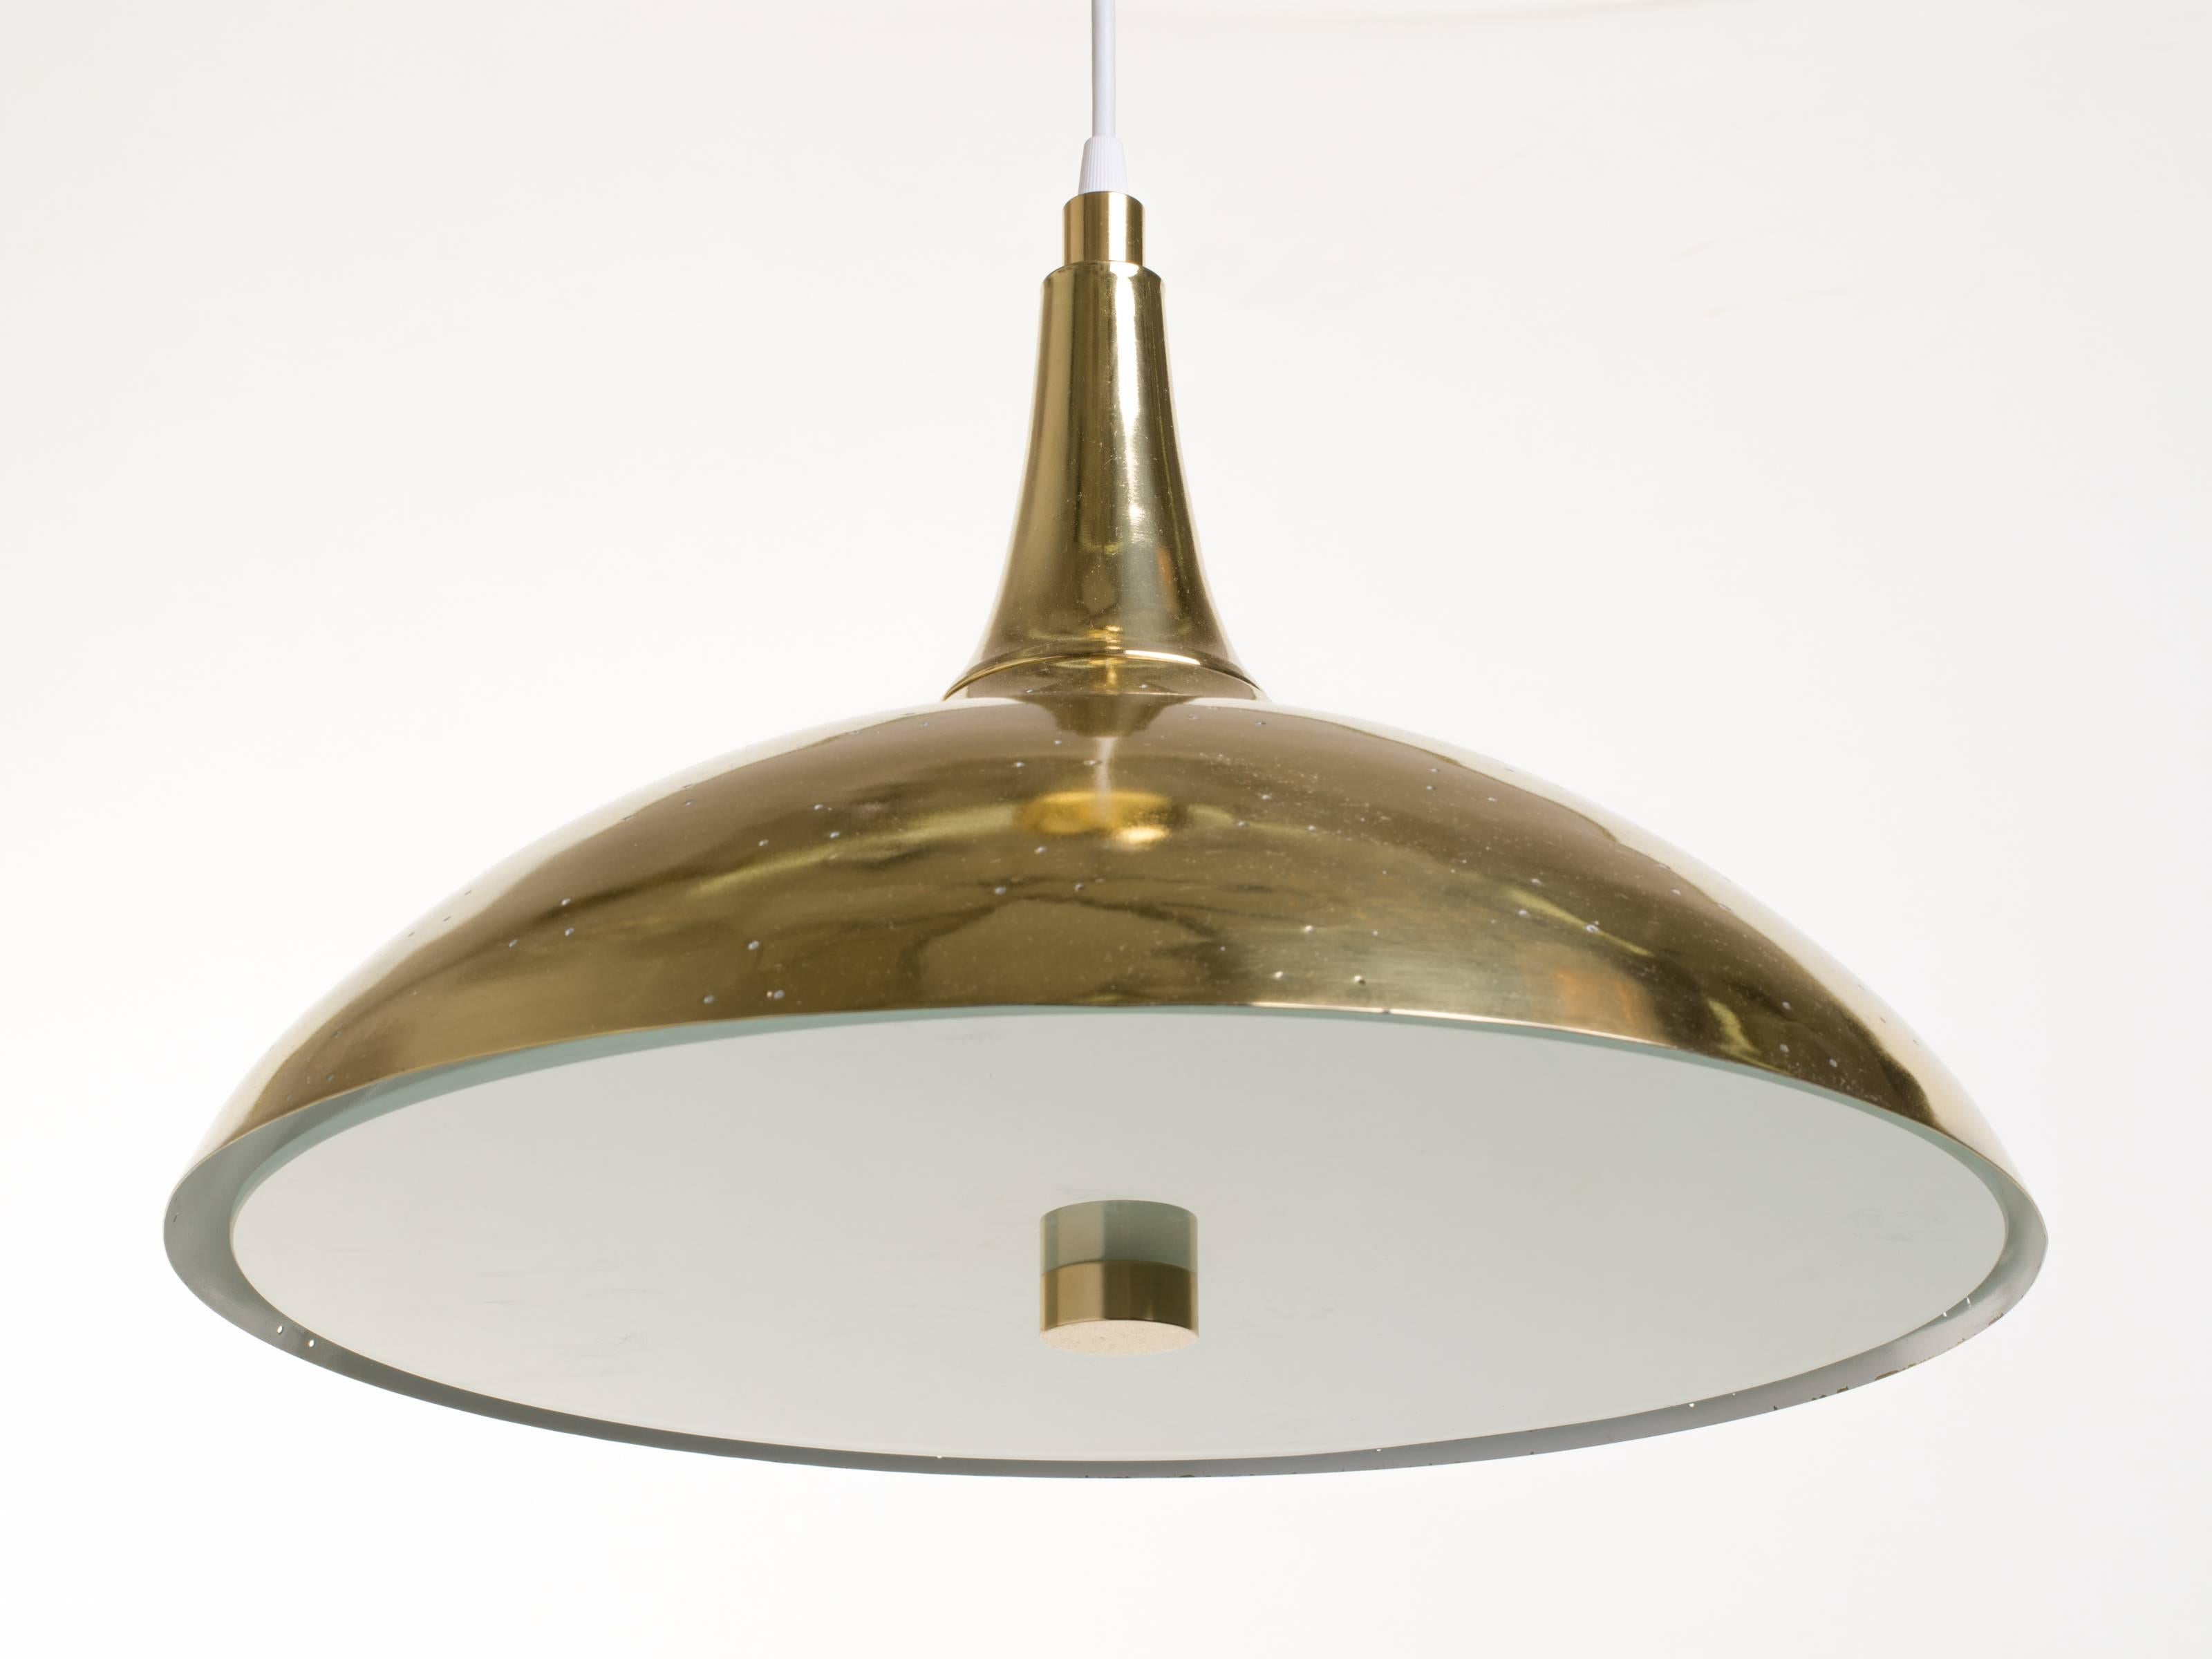 Brass and frosted glass lights with perforated brass shade. Can be sold individually.
Beautiful effect when the light passes through metal shade. Down light is very soft due to the frosted glass diffuser.
Four candelabra sockets. 
Height can be